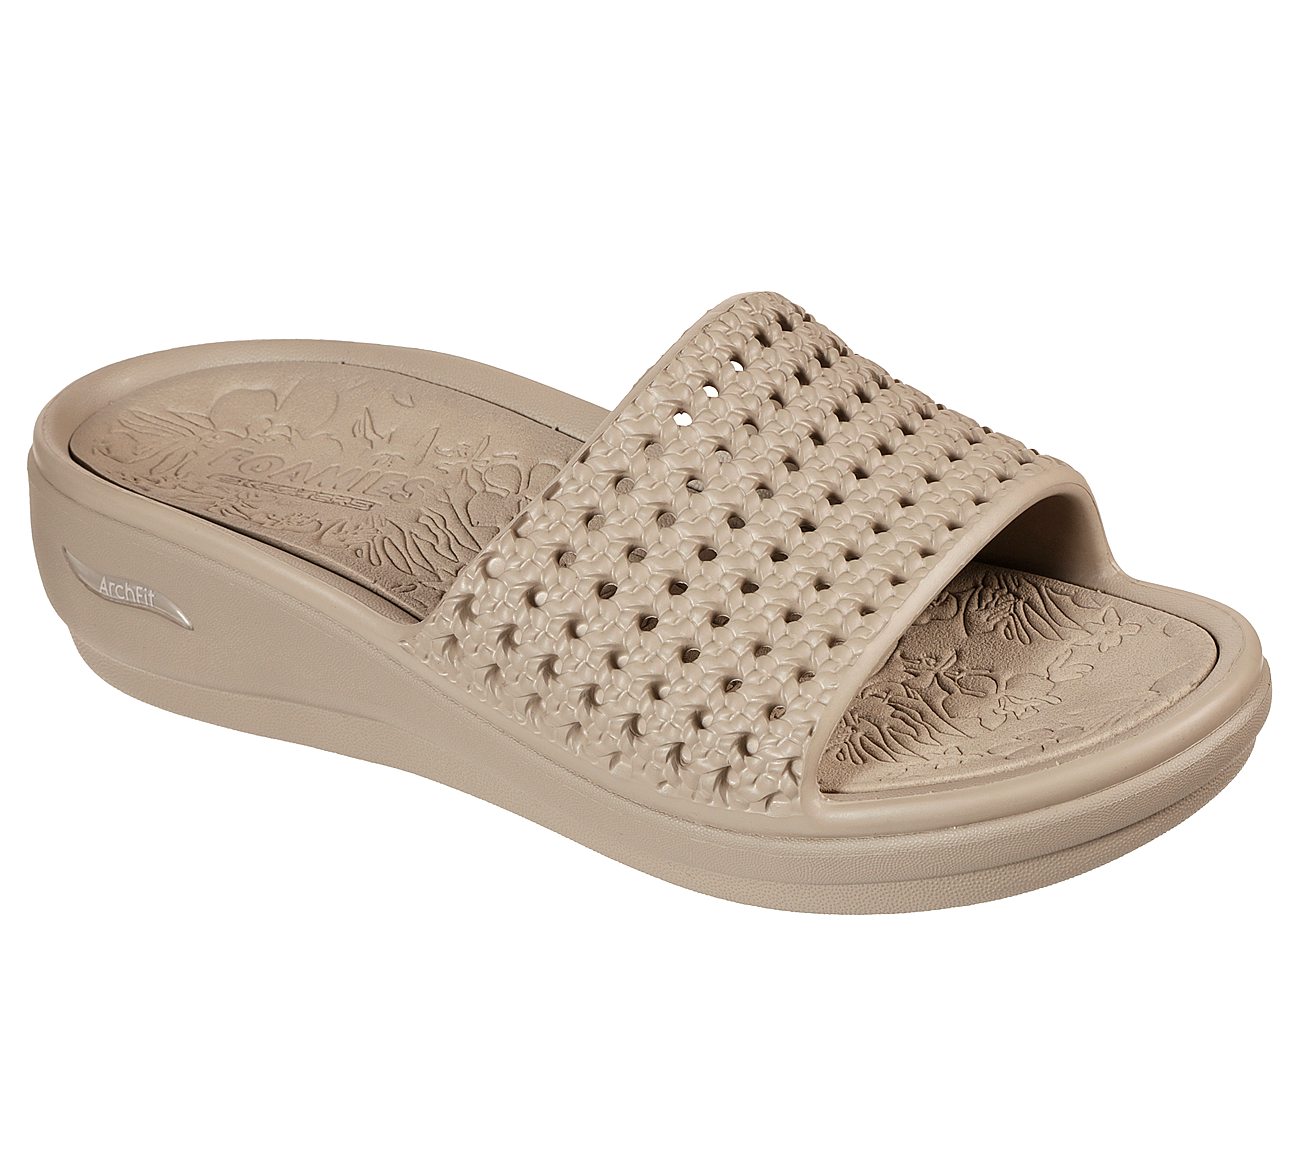 ARCH FIT ASCEND - DARLING, TTAUPE Footwear Right View